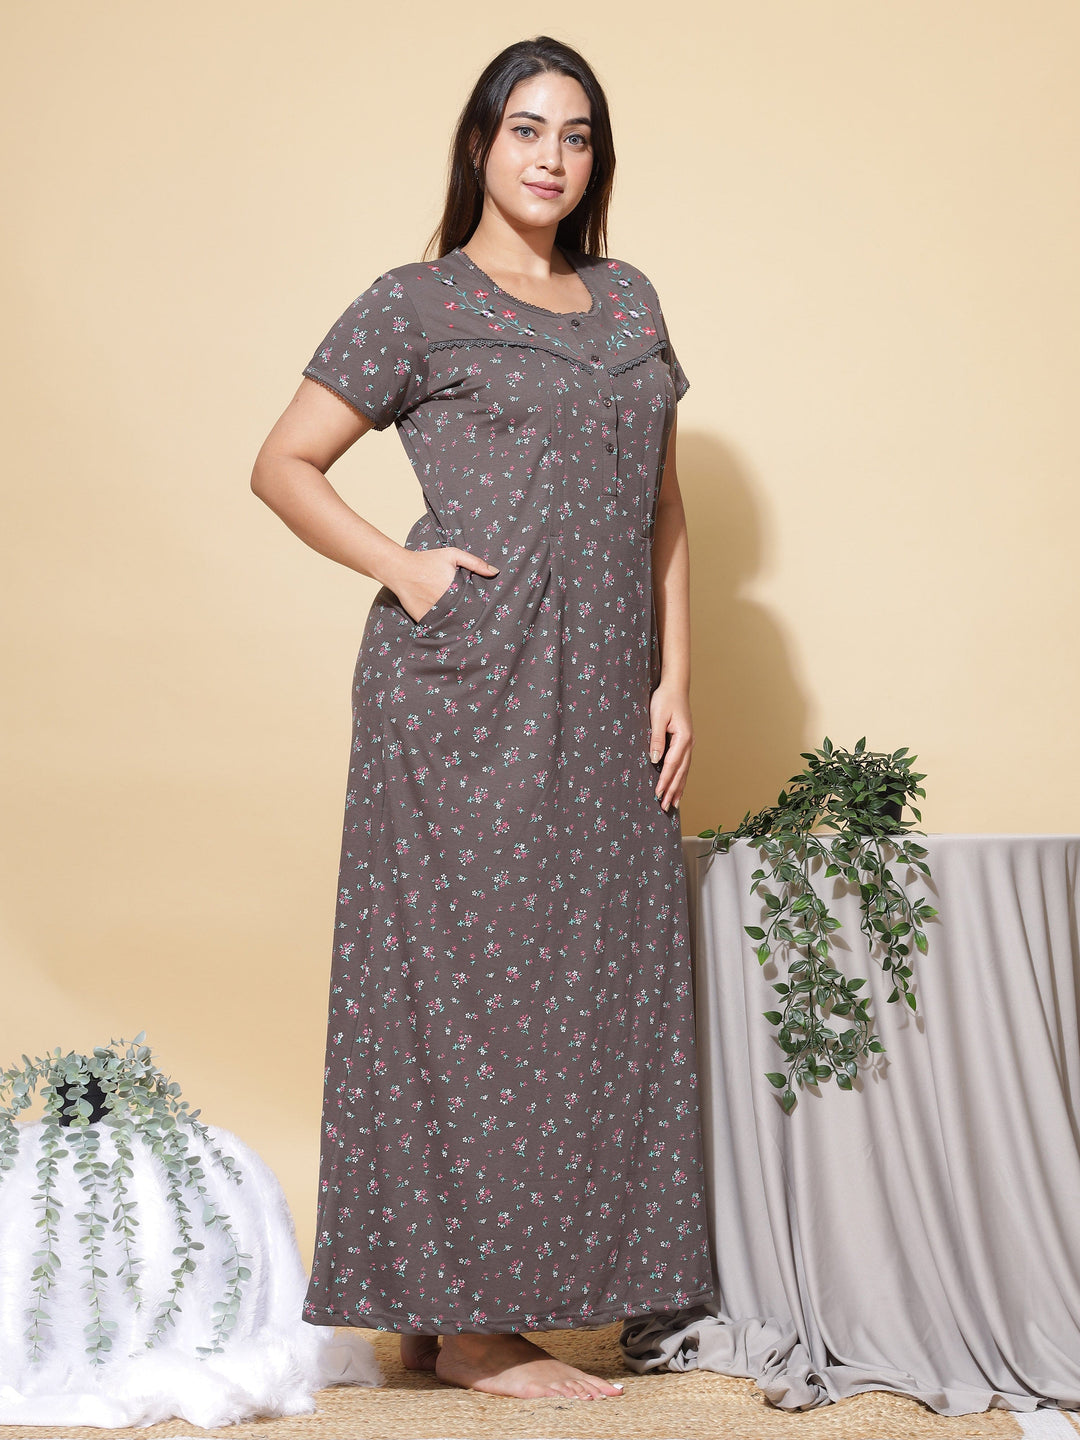 Maroon Embroidery Soft Cotton Long Sleeves Nighty. Soft Breathable